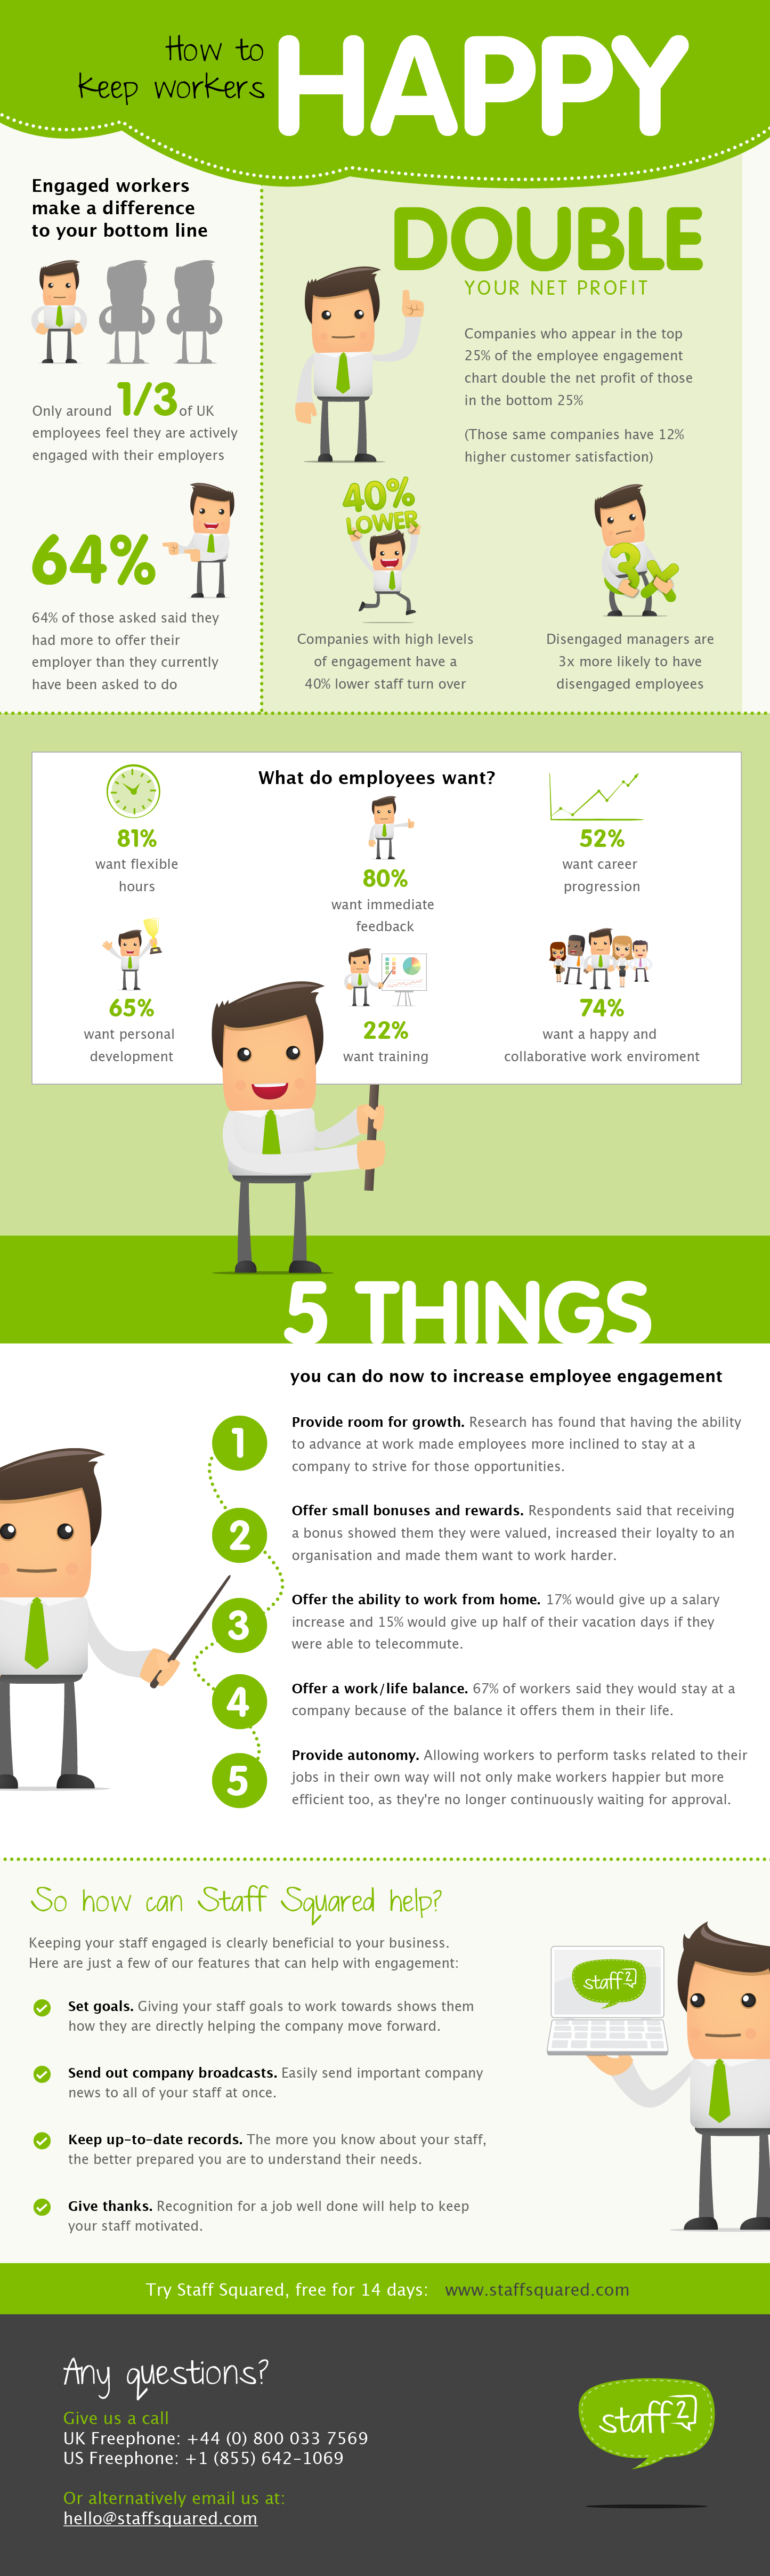 How to Keep Workers Happy [Infographic]